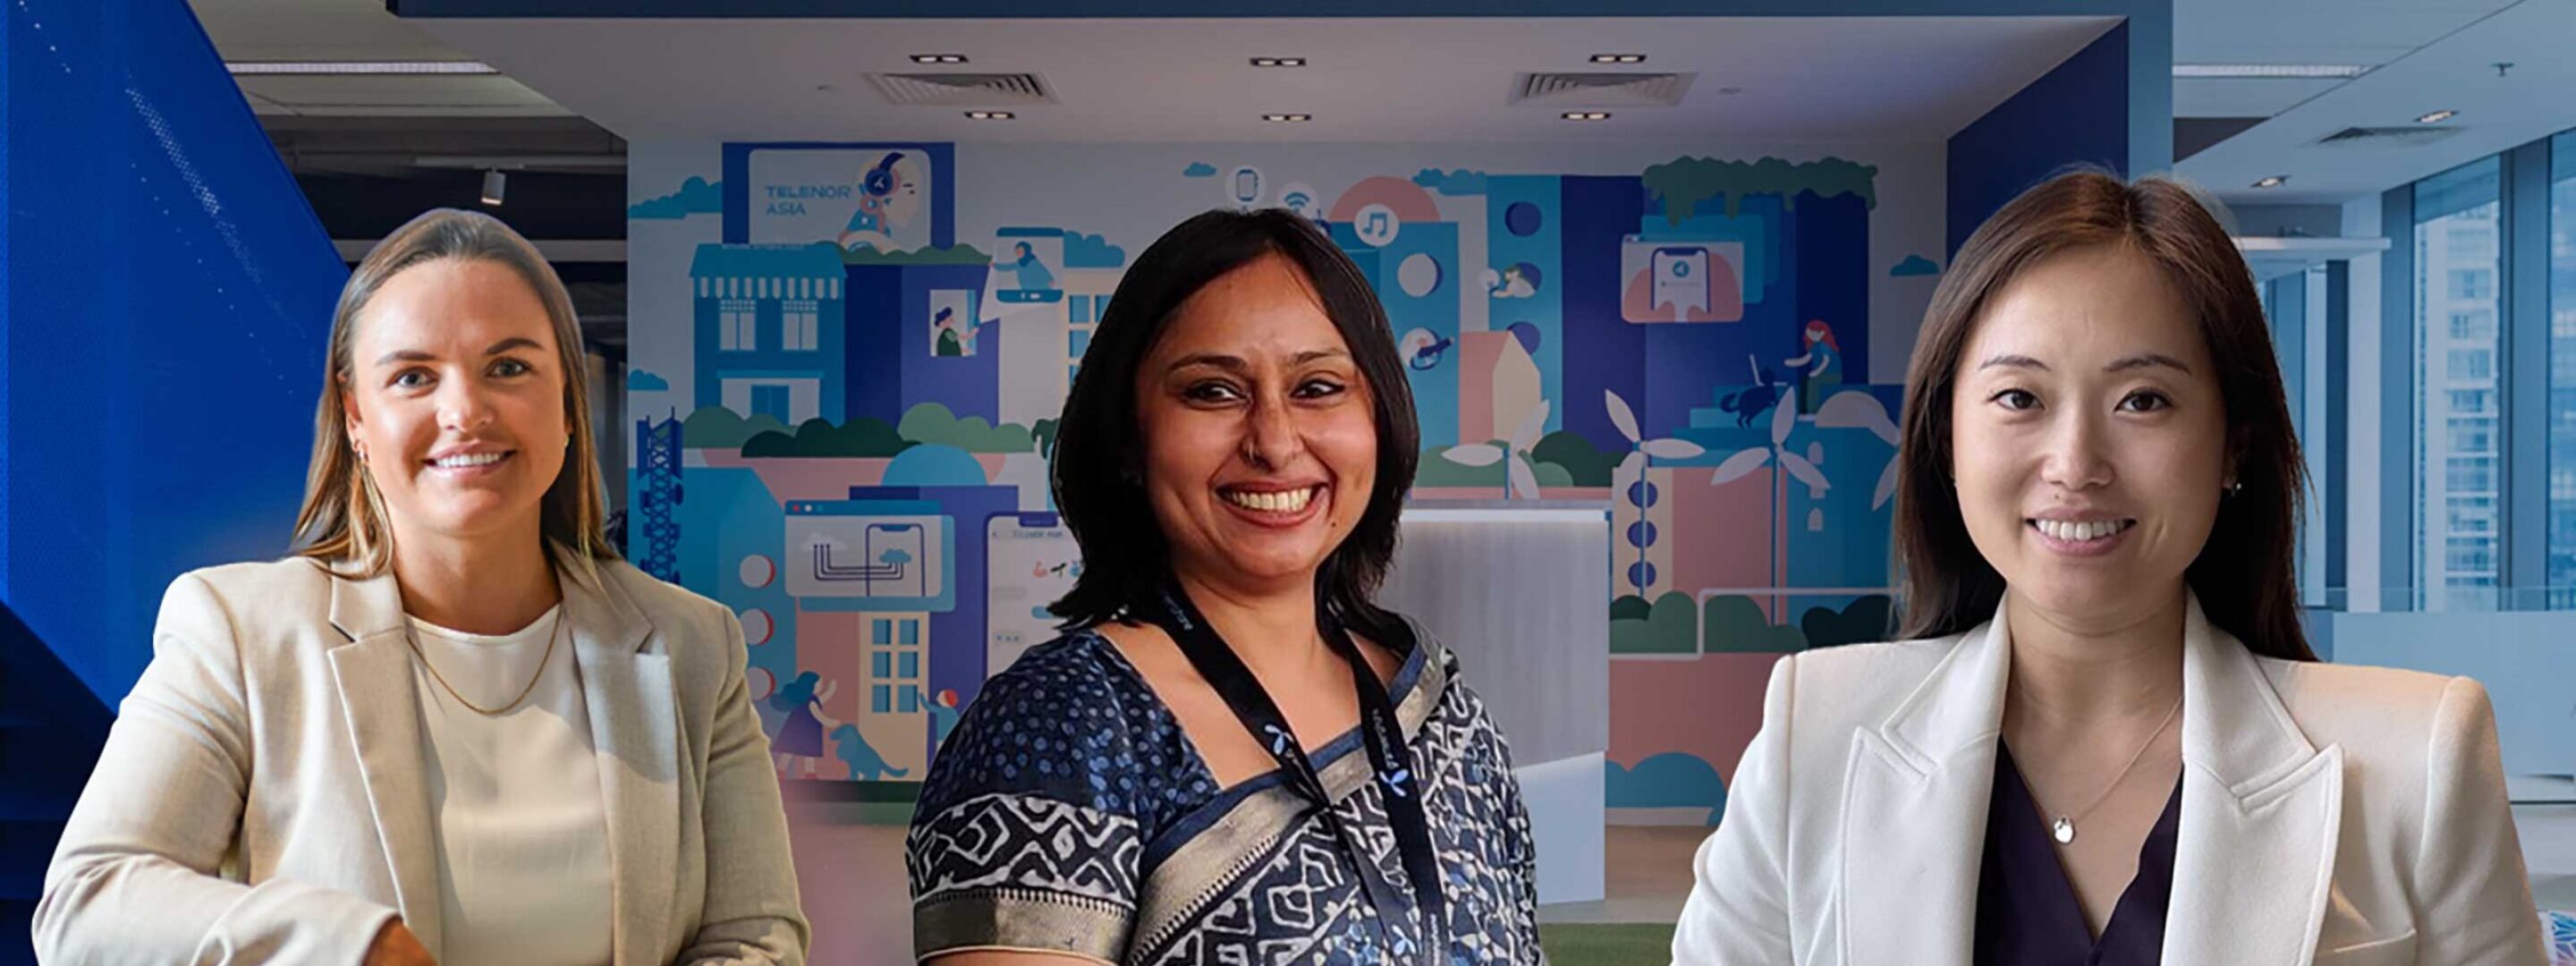 Telenor Asia in action: Three strong women leaders paving the path in Asia